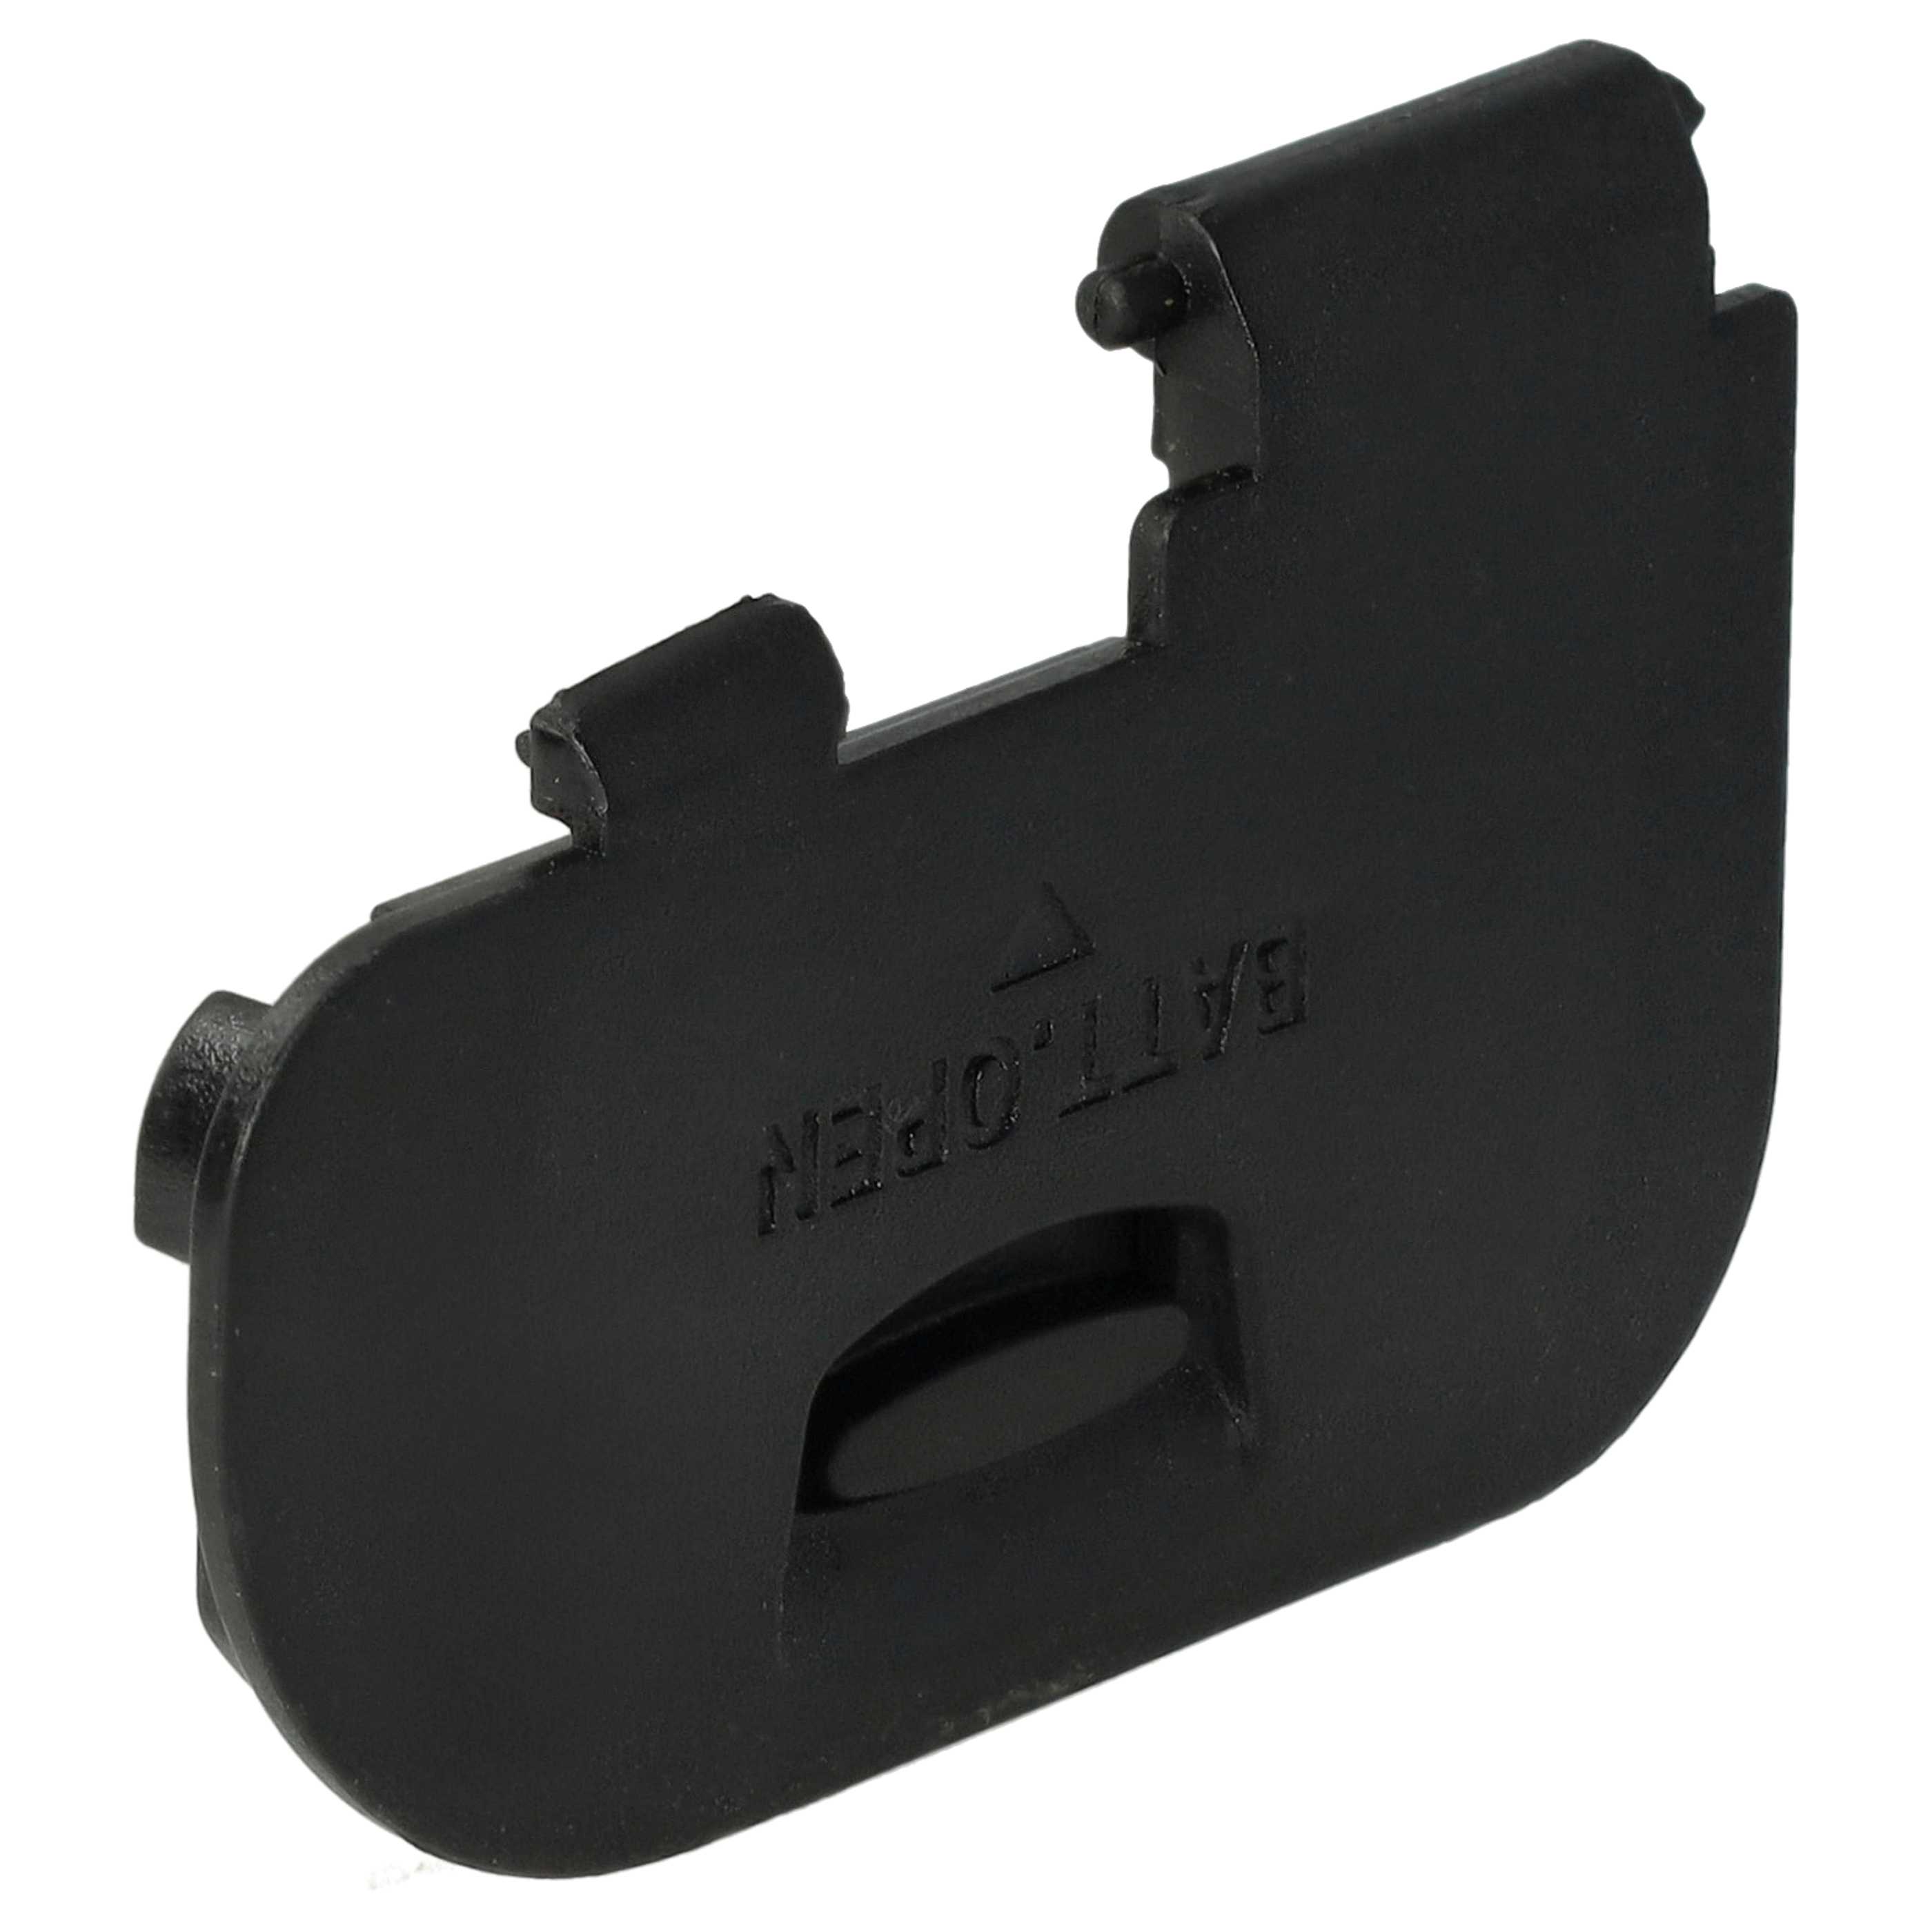 Battery Door Cover suitable for Canon EOS 70D Camera, Battery Grip